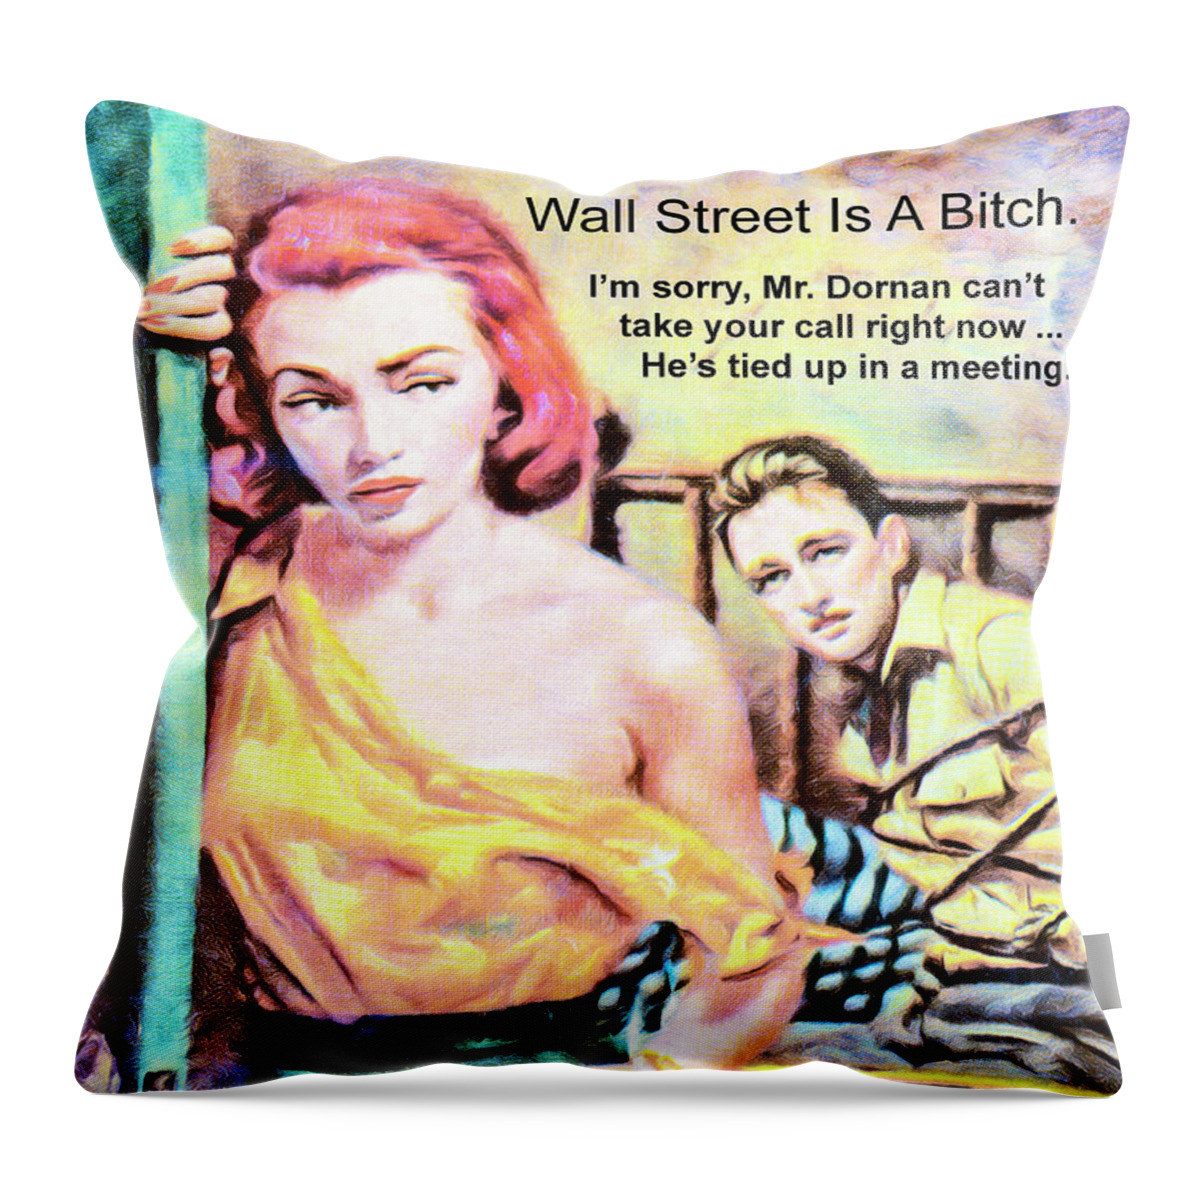 Pulp Fiction Throw Pillow featuring the mixed media Slave Trader by Dominic Piperata